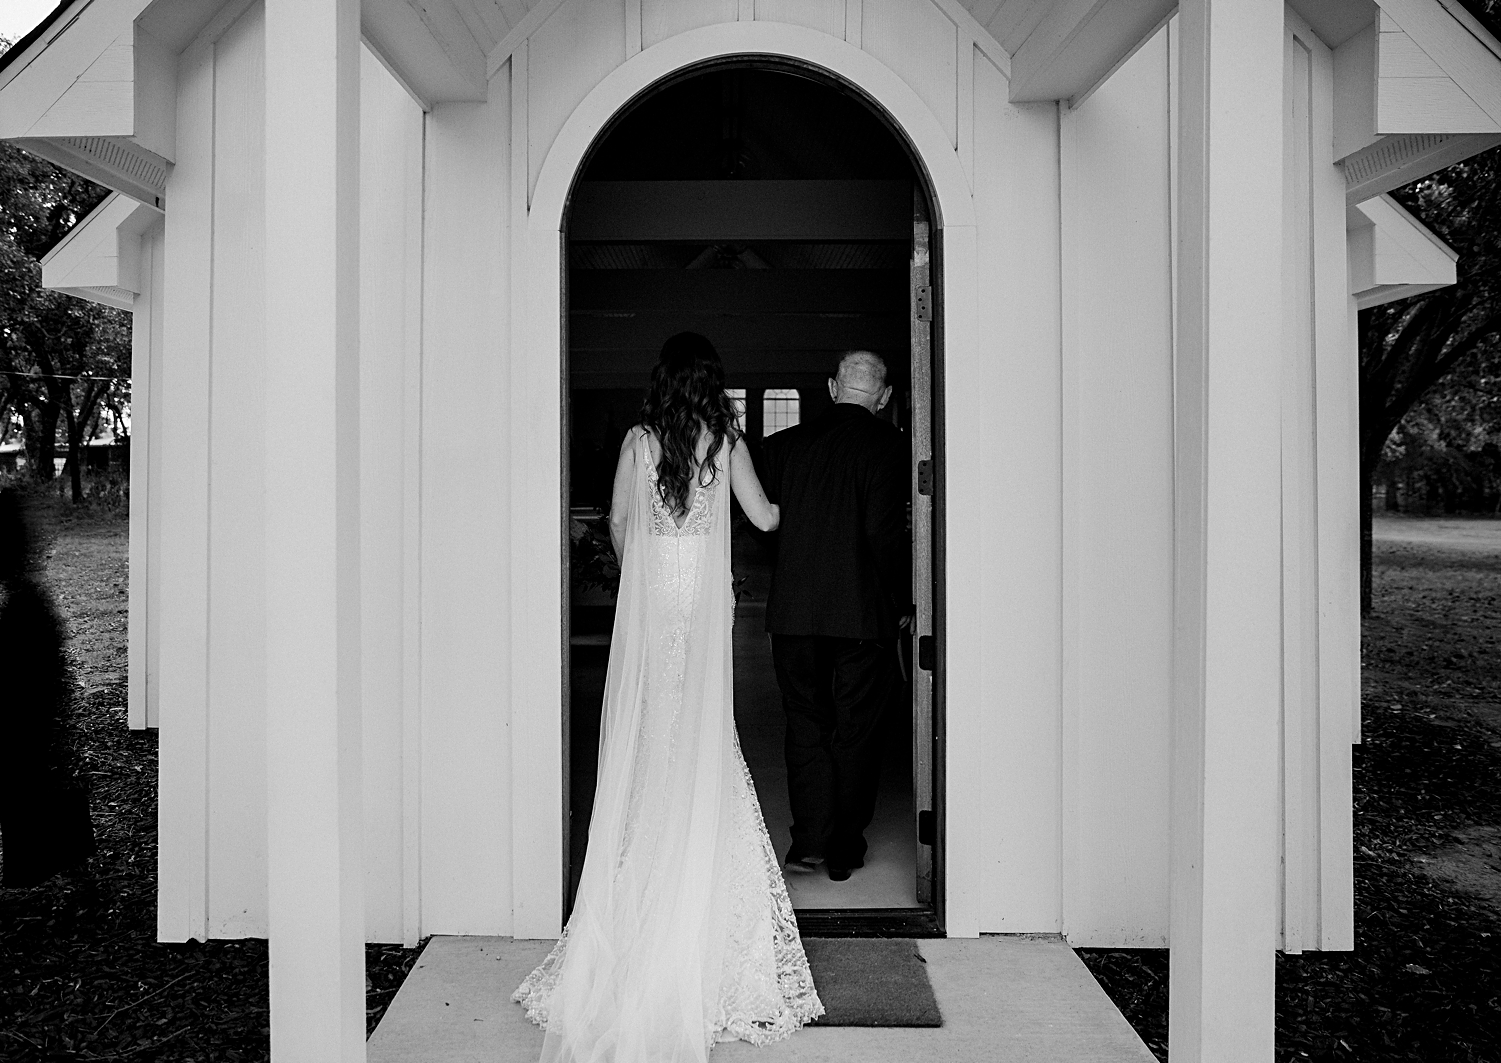 back of father and bride entering doorway white chapel wedding